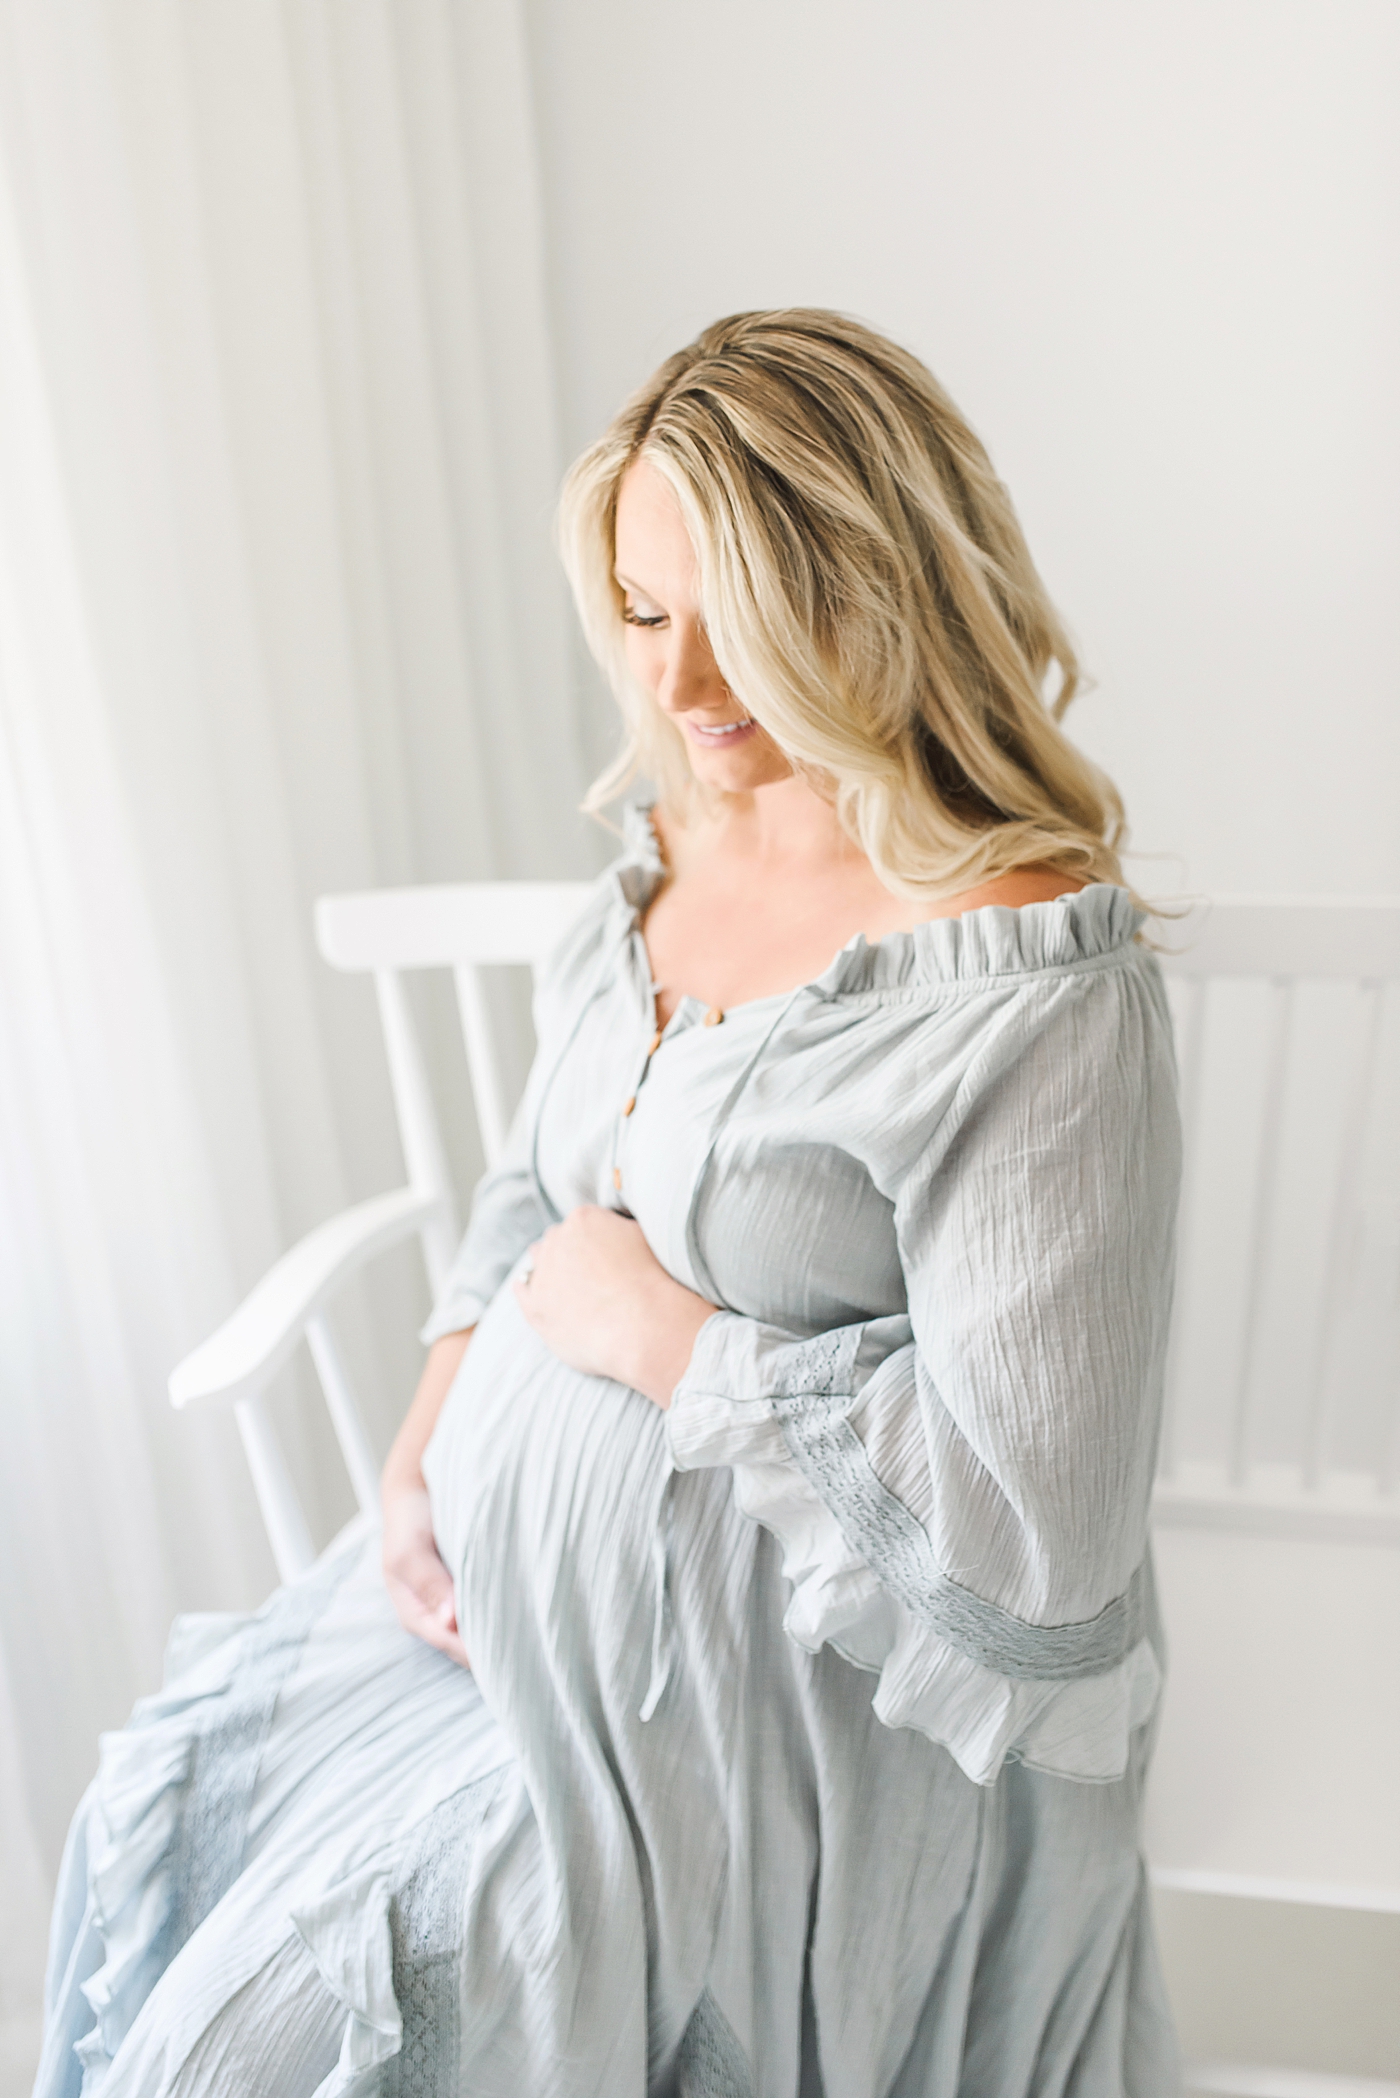 Pregnant woman in blue dress sitting on white bench | Photo by Anna Wisjo Photography